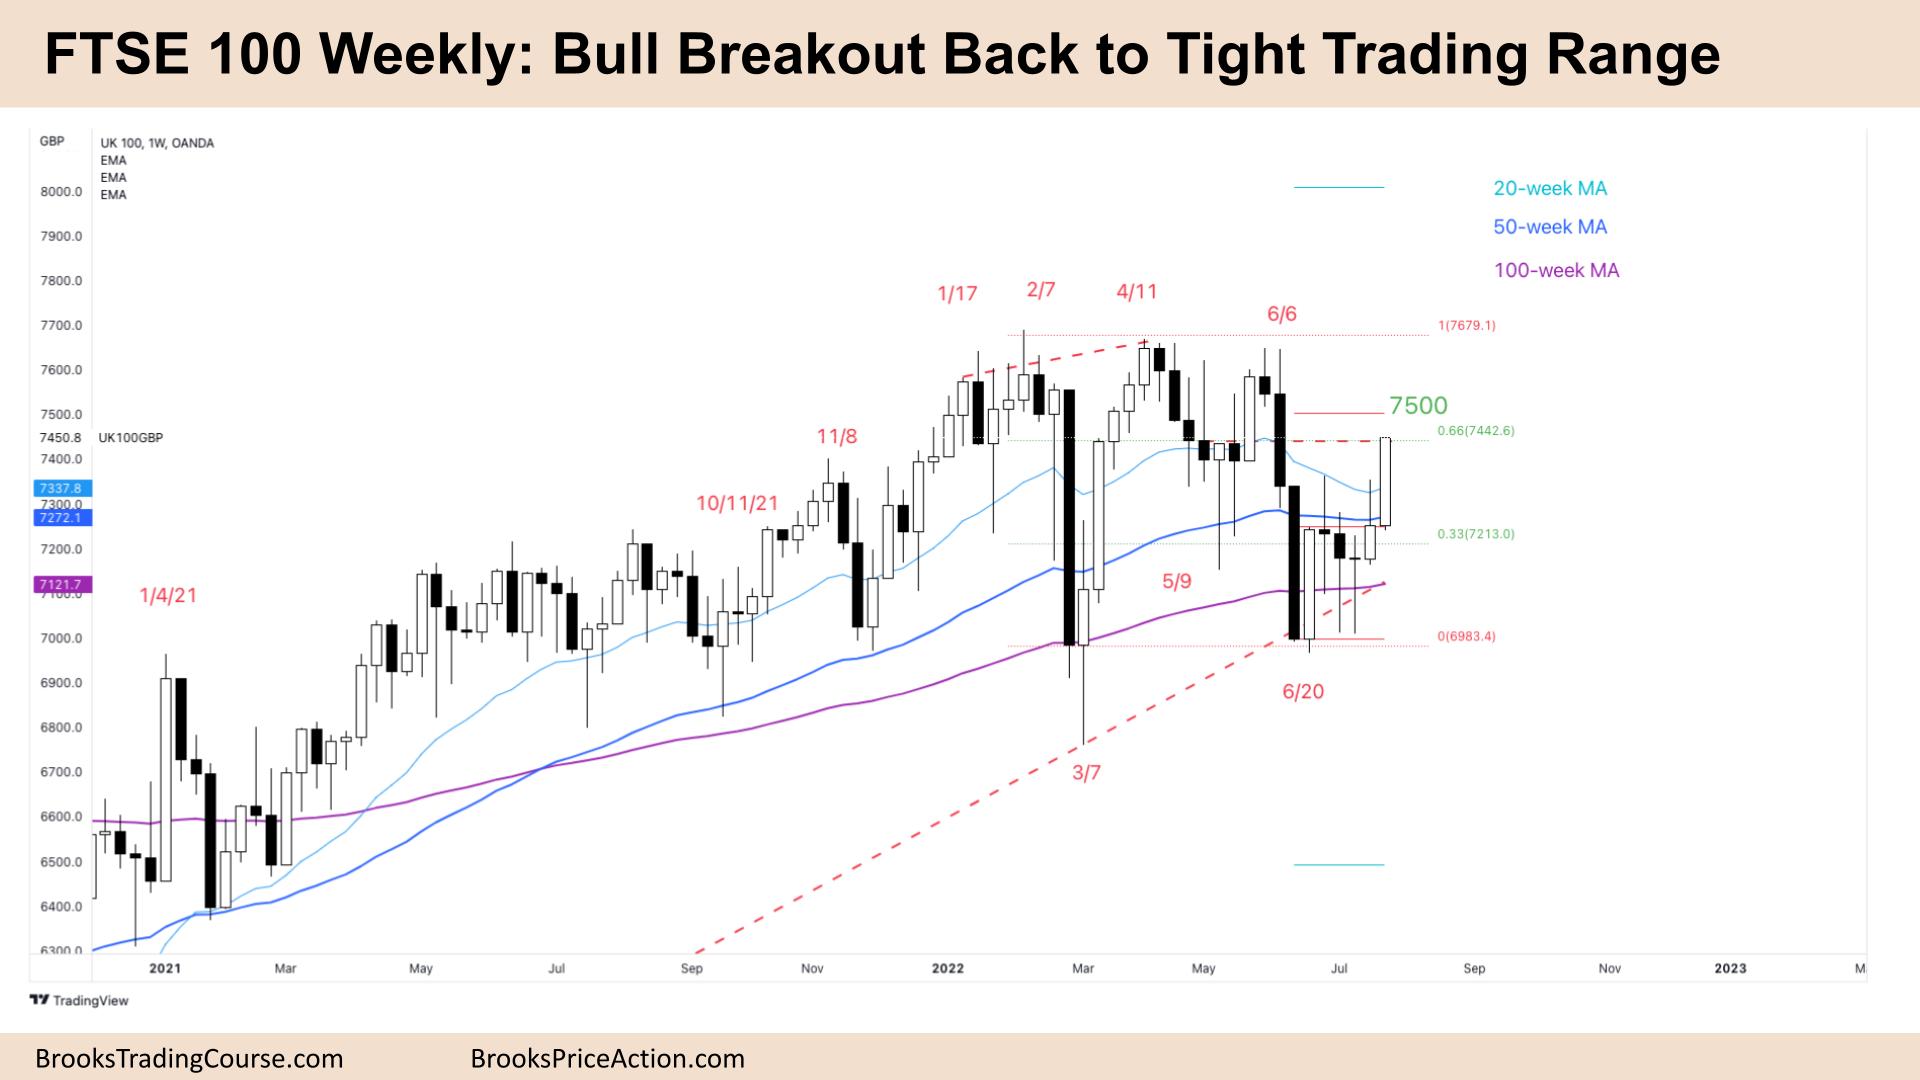 FTSE 100 Weekly Bull Breakout Back to Tight Trading Range